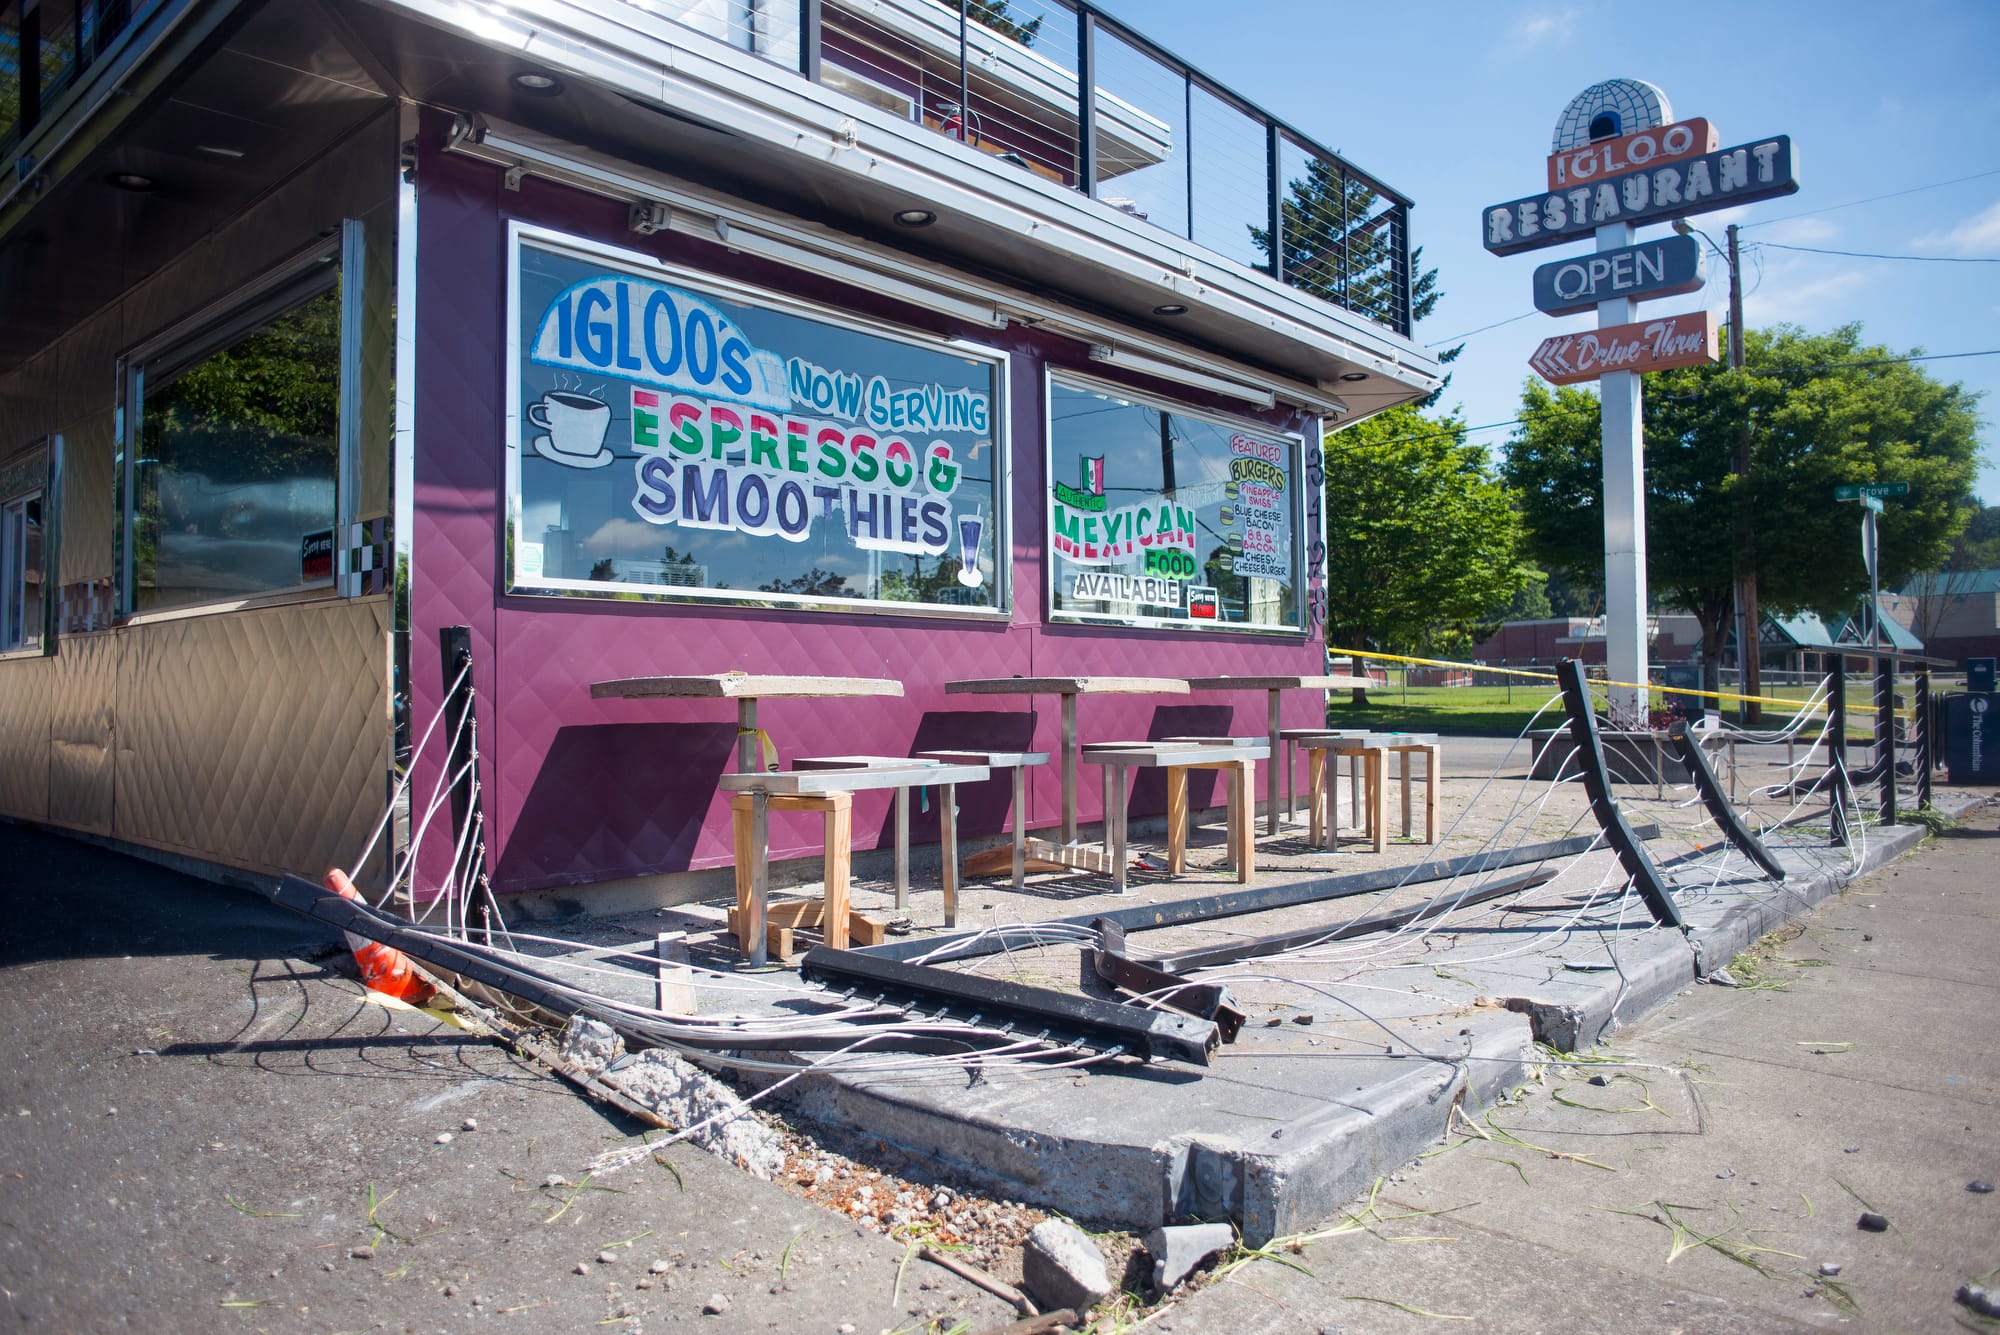 The aftermath of a deadly car crash at the Igloo Restaurant in Vancouver is pictured on Saturday. Three people died and one was injured in the accident on Friday.